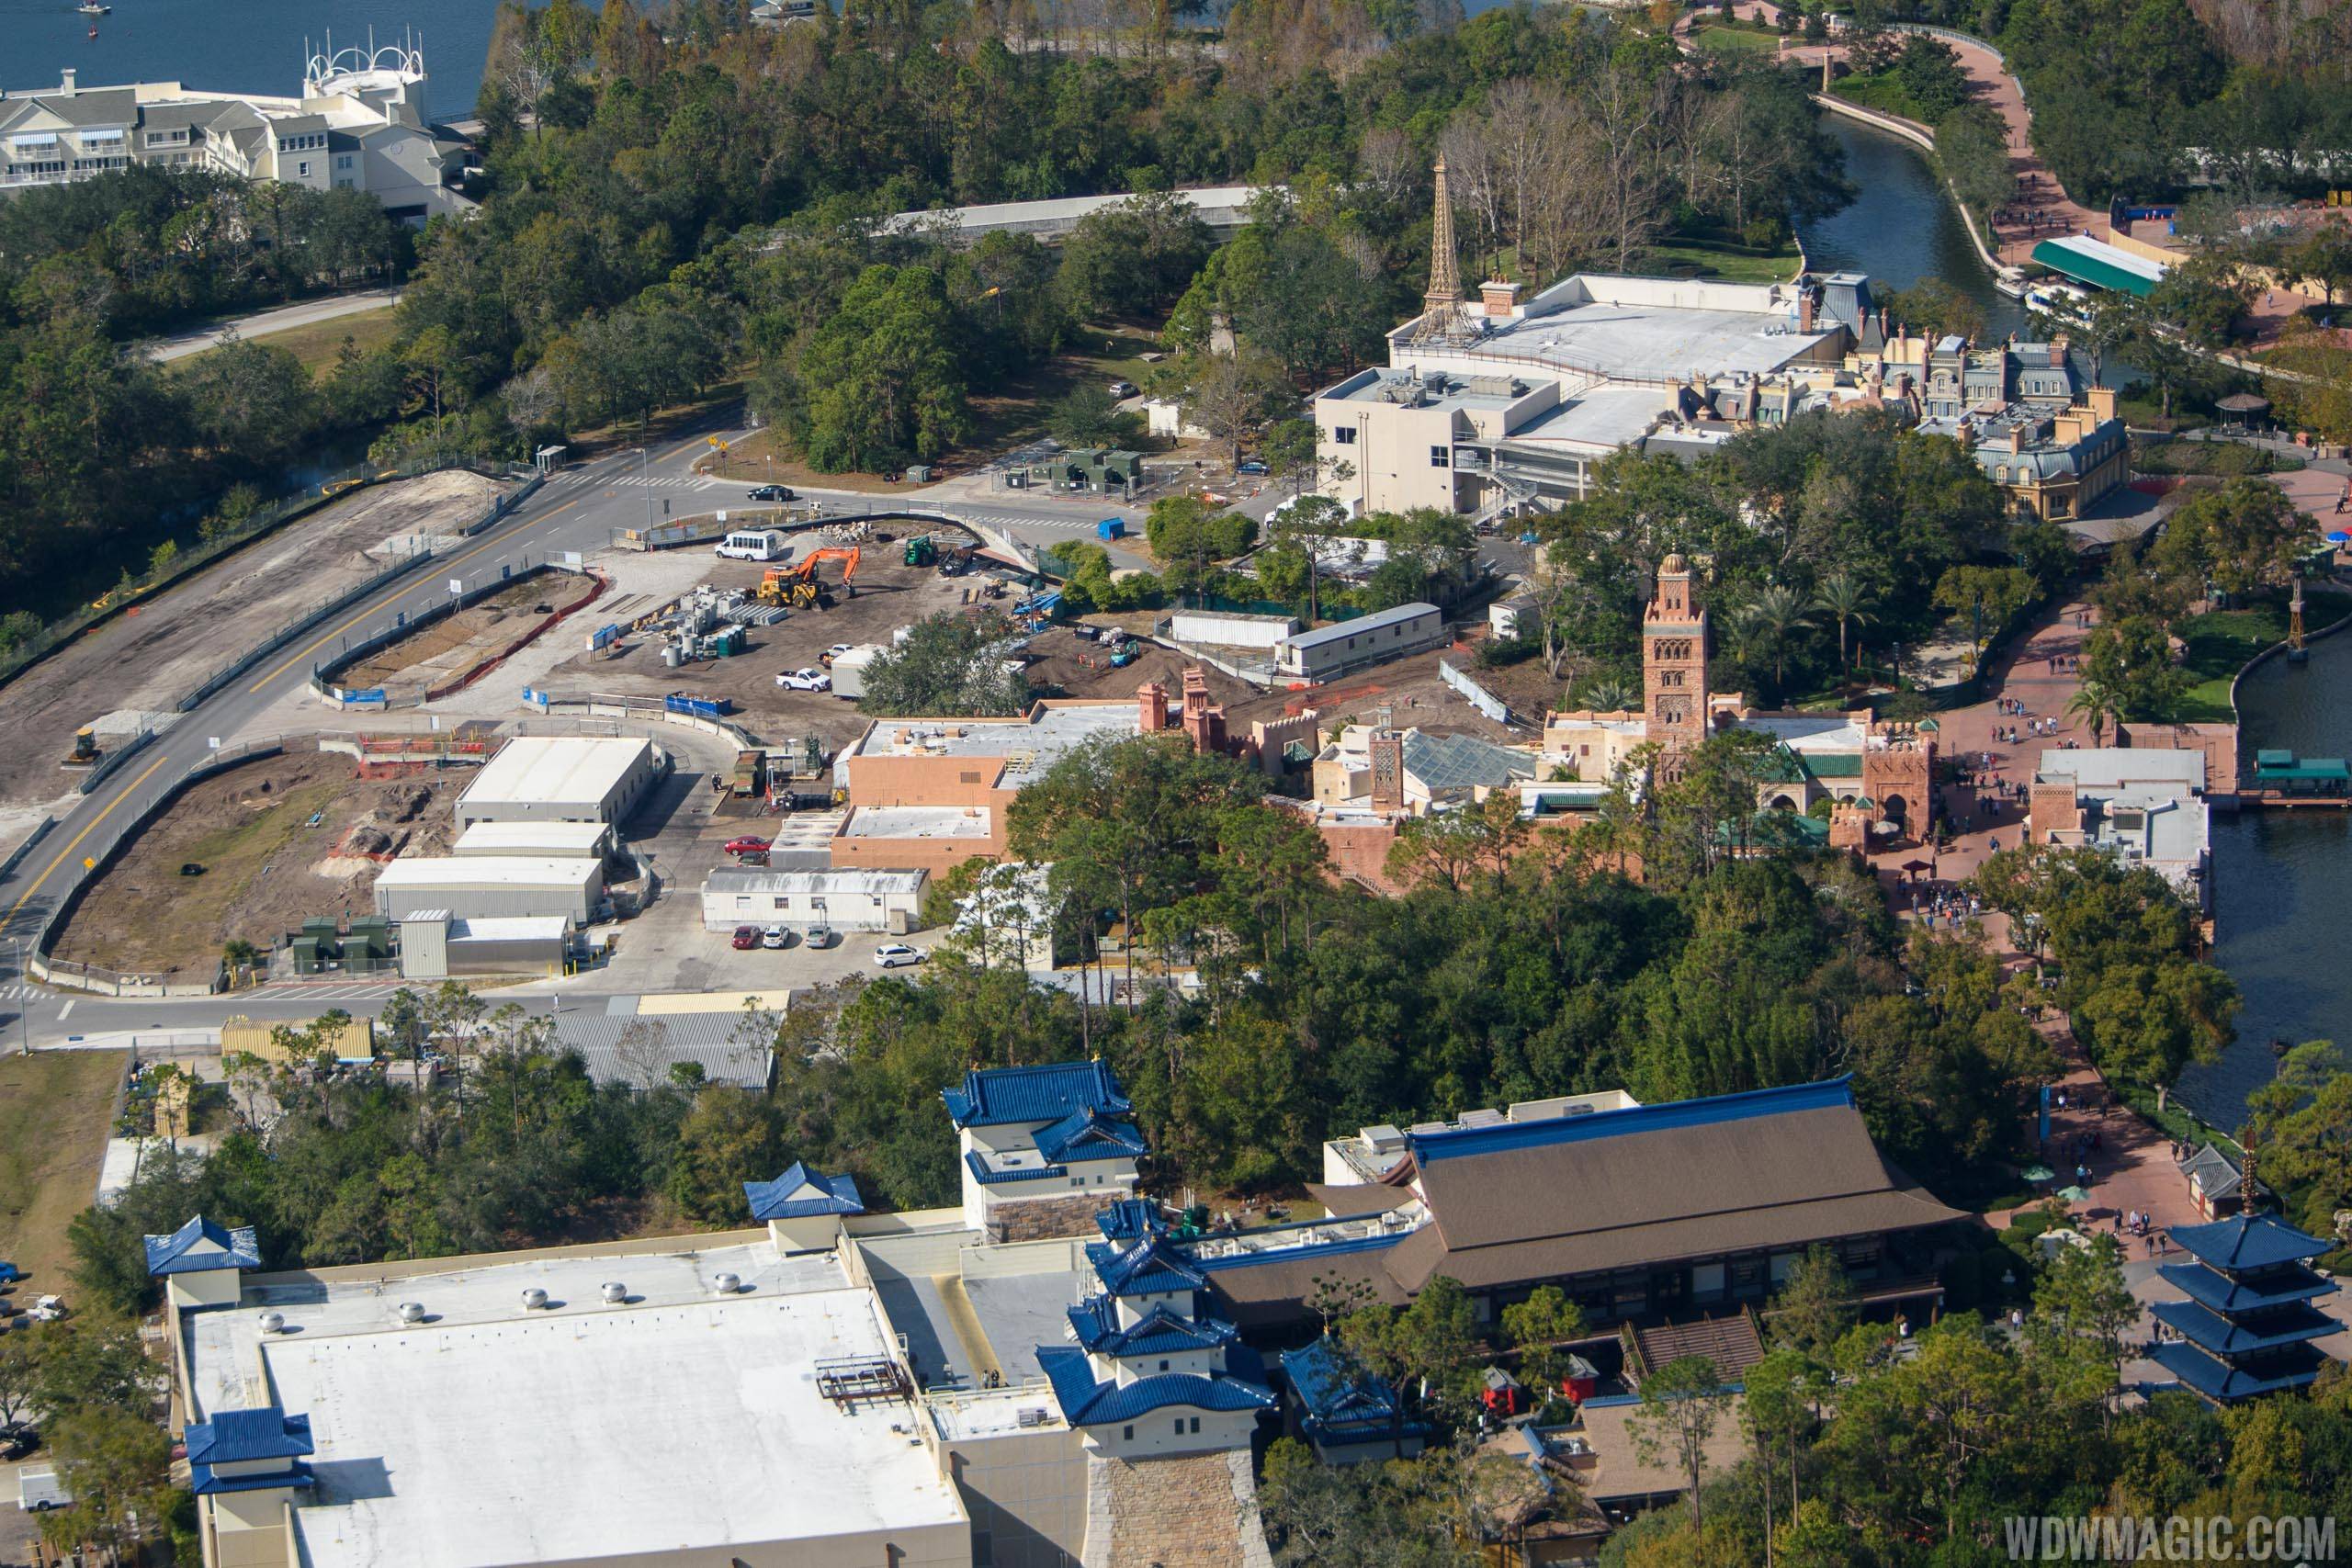 PHOTO - Aerial view of the Ratatouille construction site at Epcot